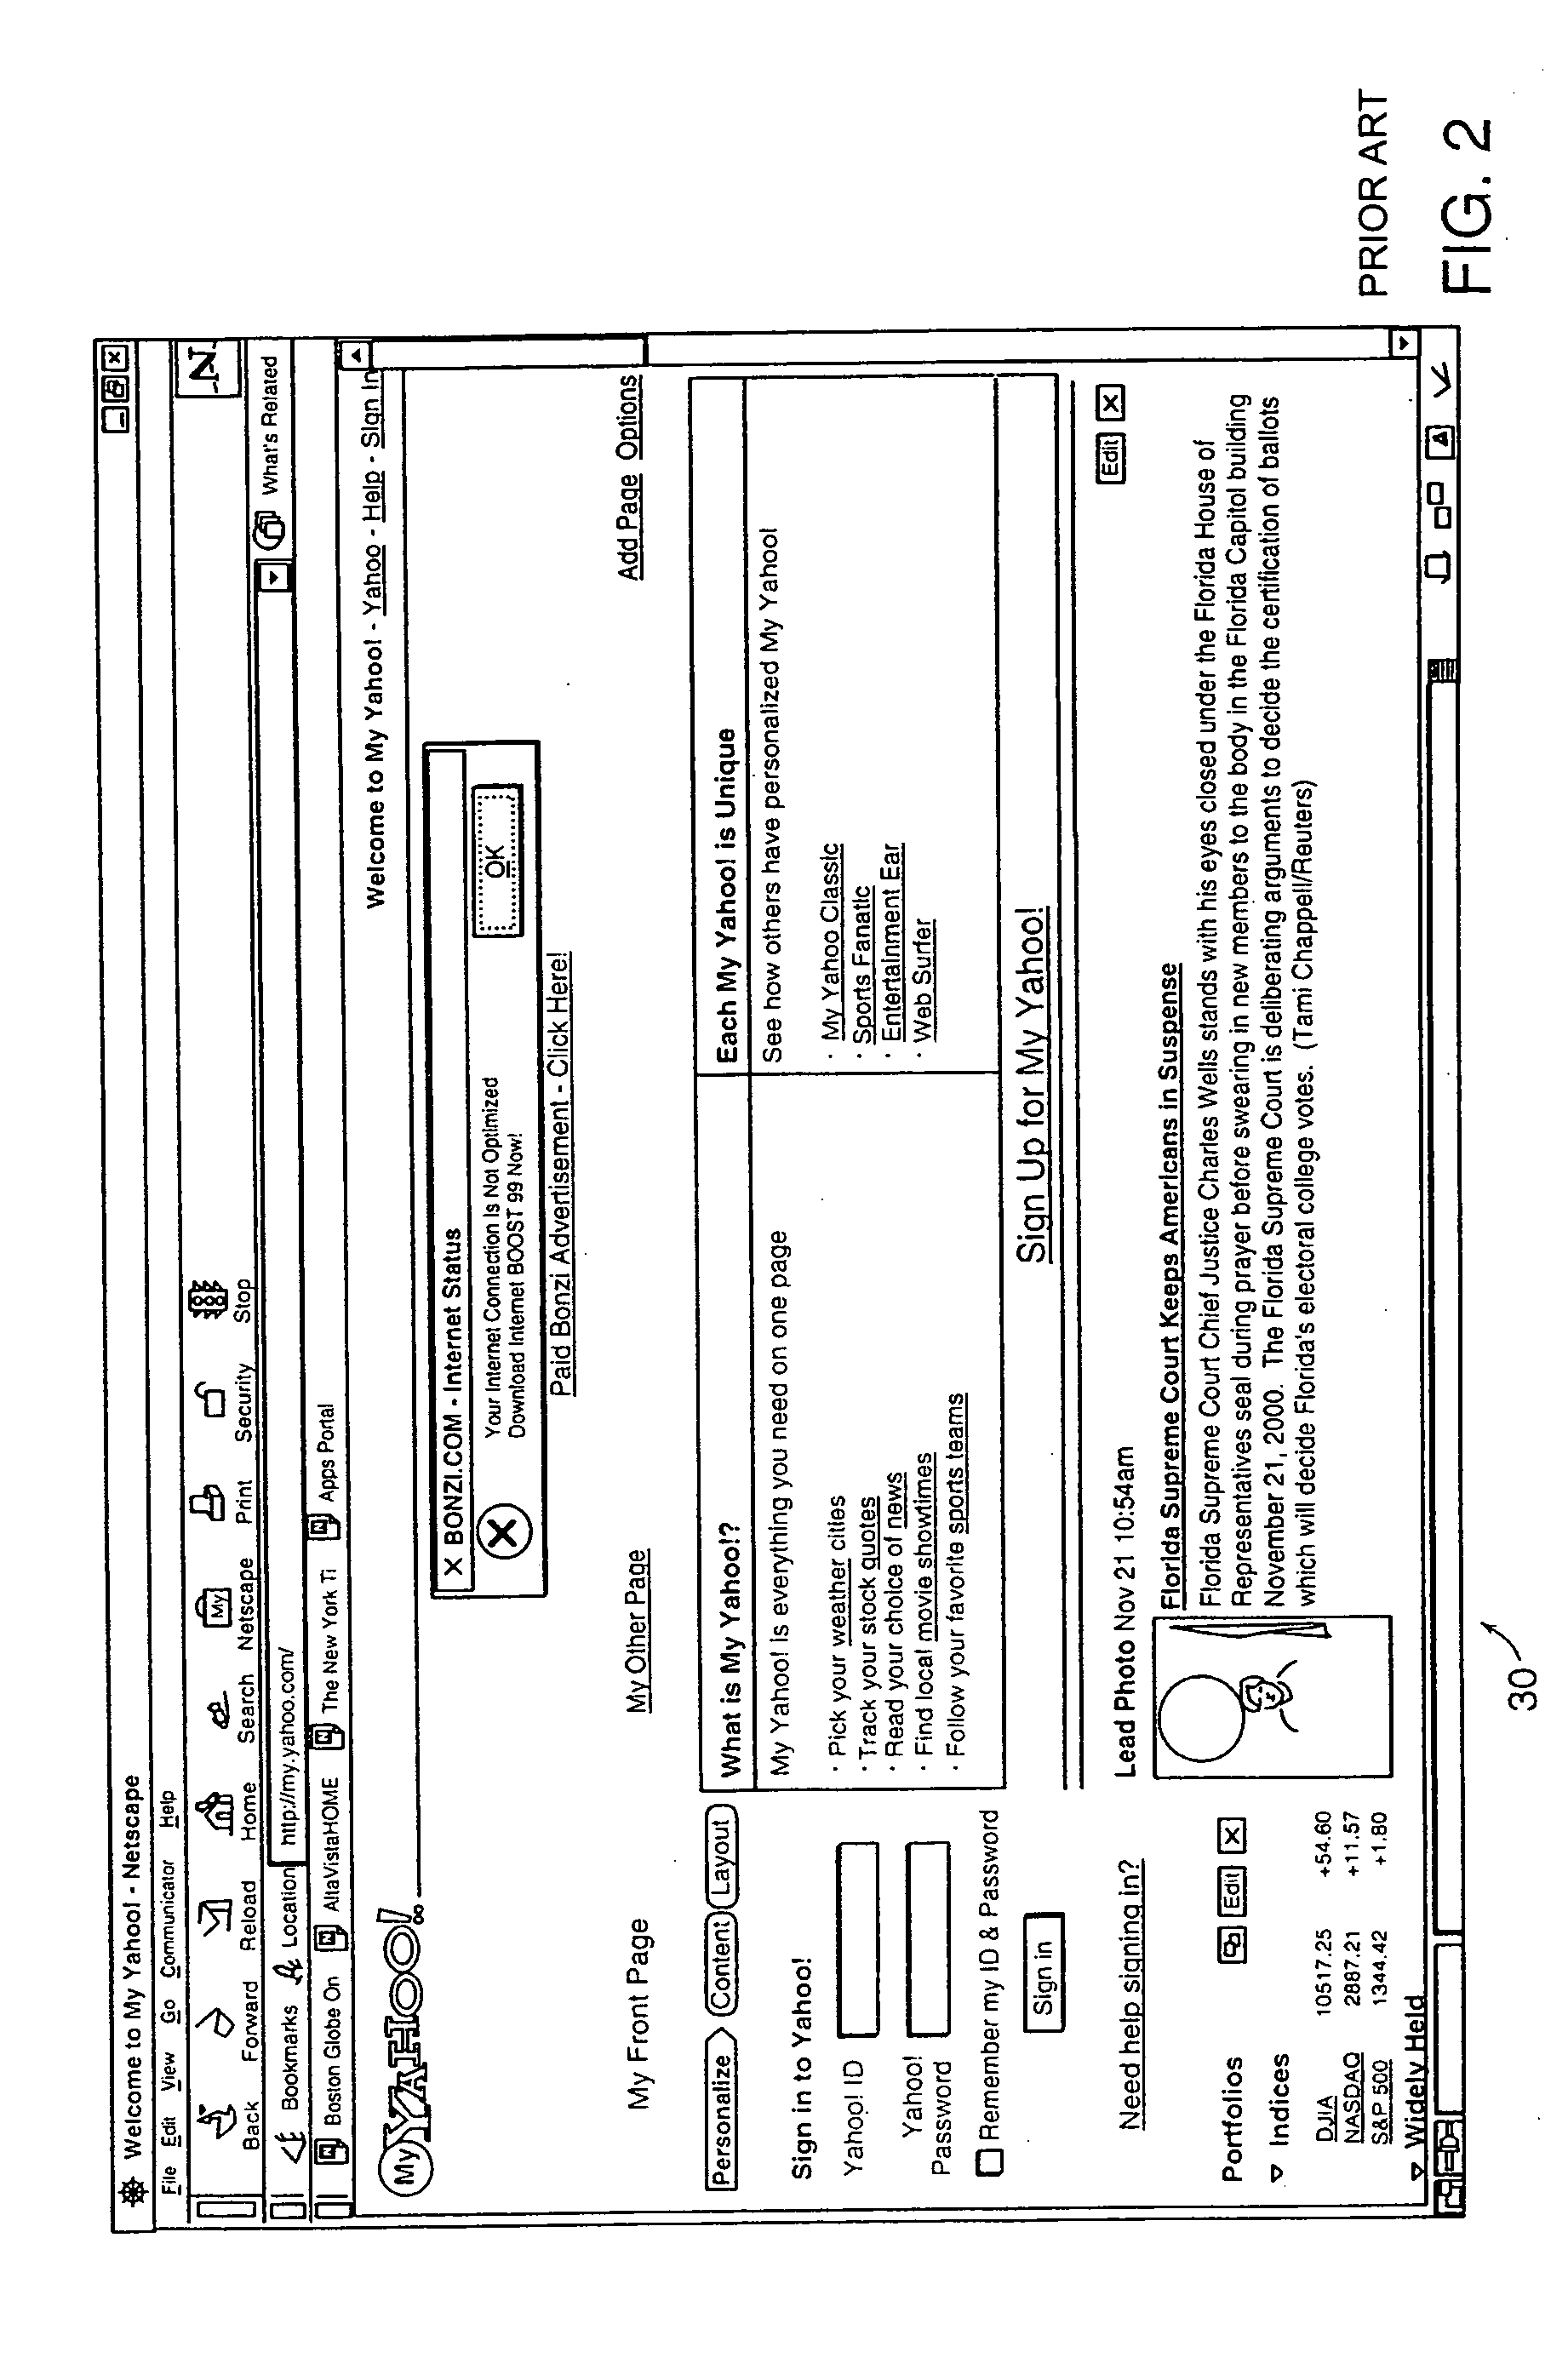 Method and system for web page personalization